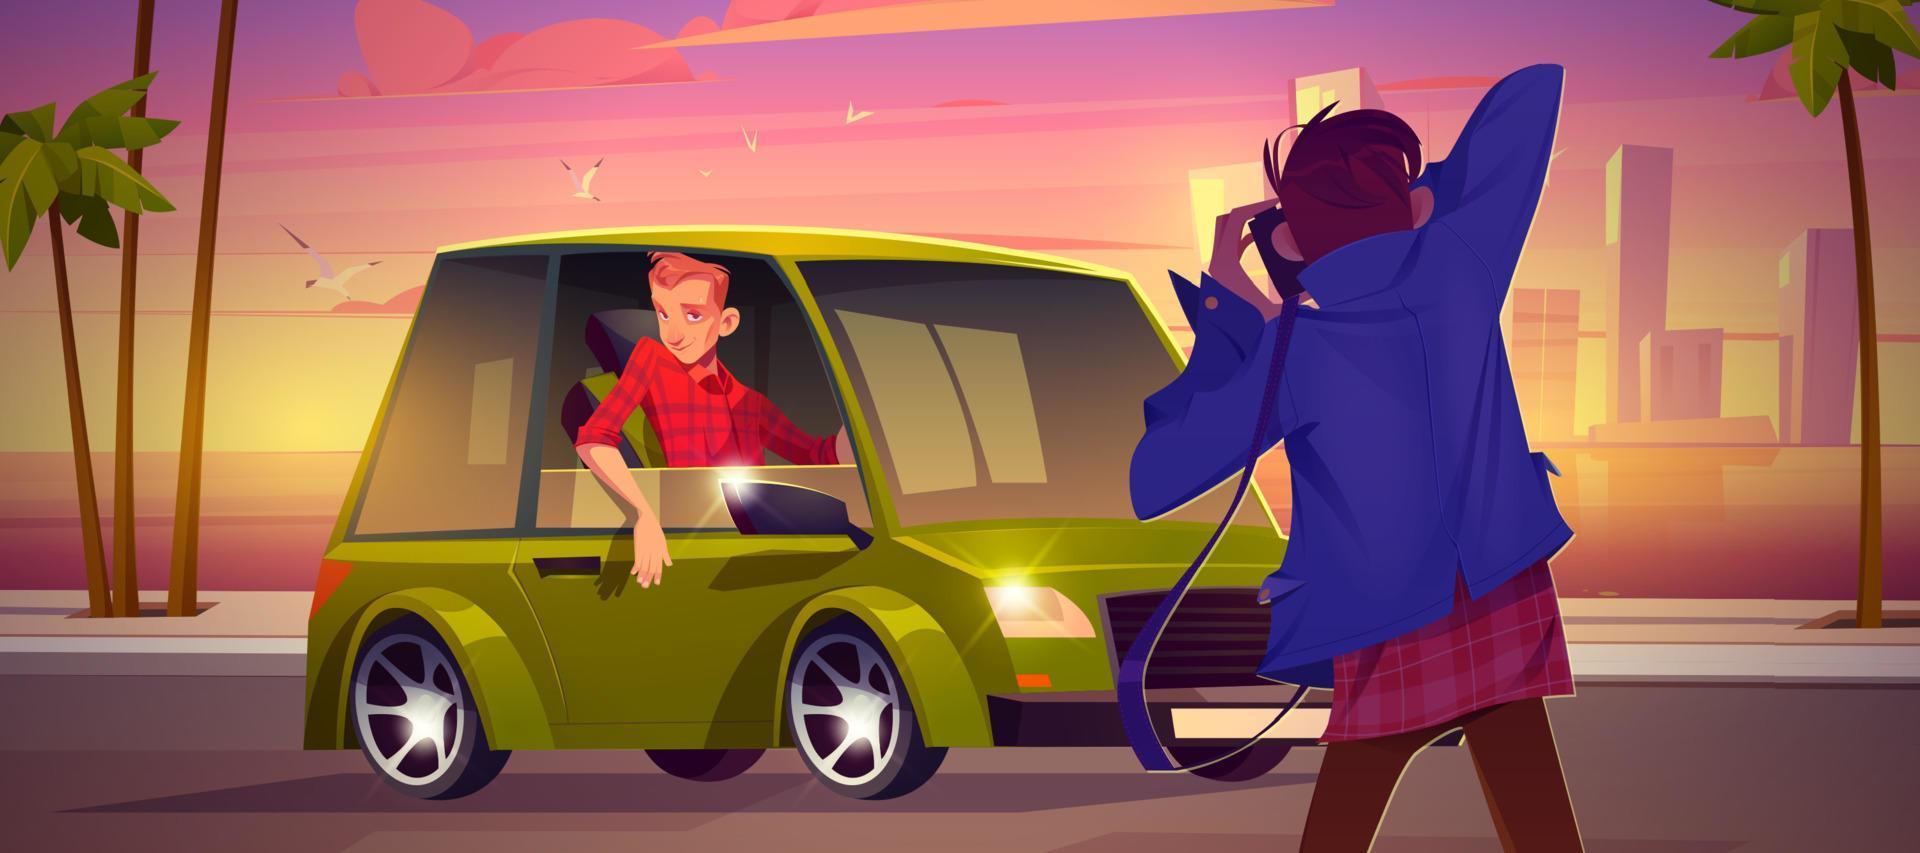 Man with camera take photo of driver in car vector